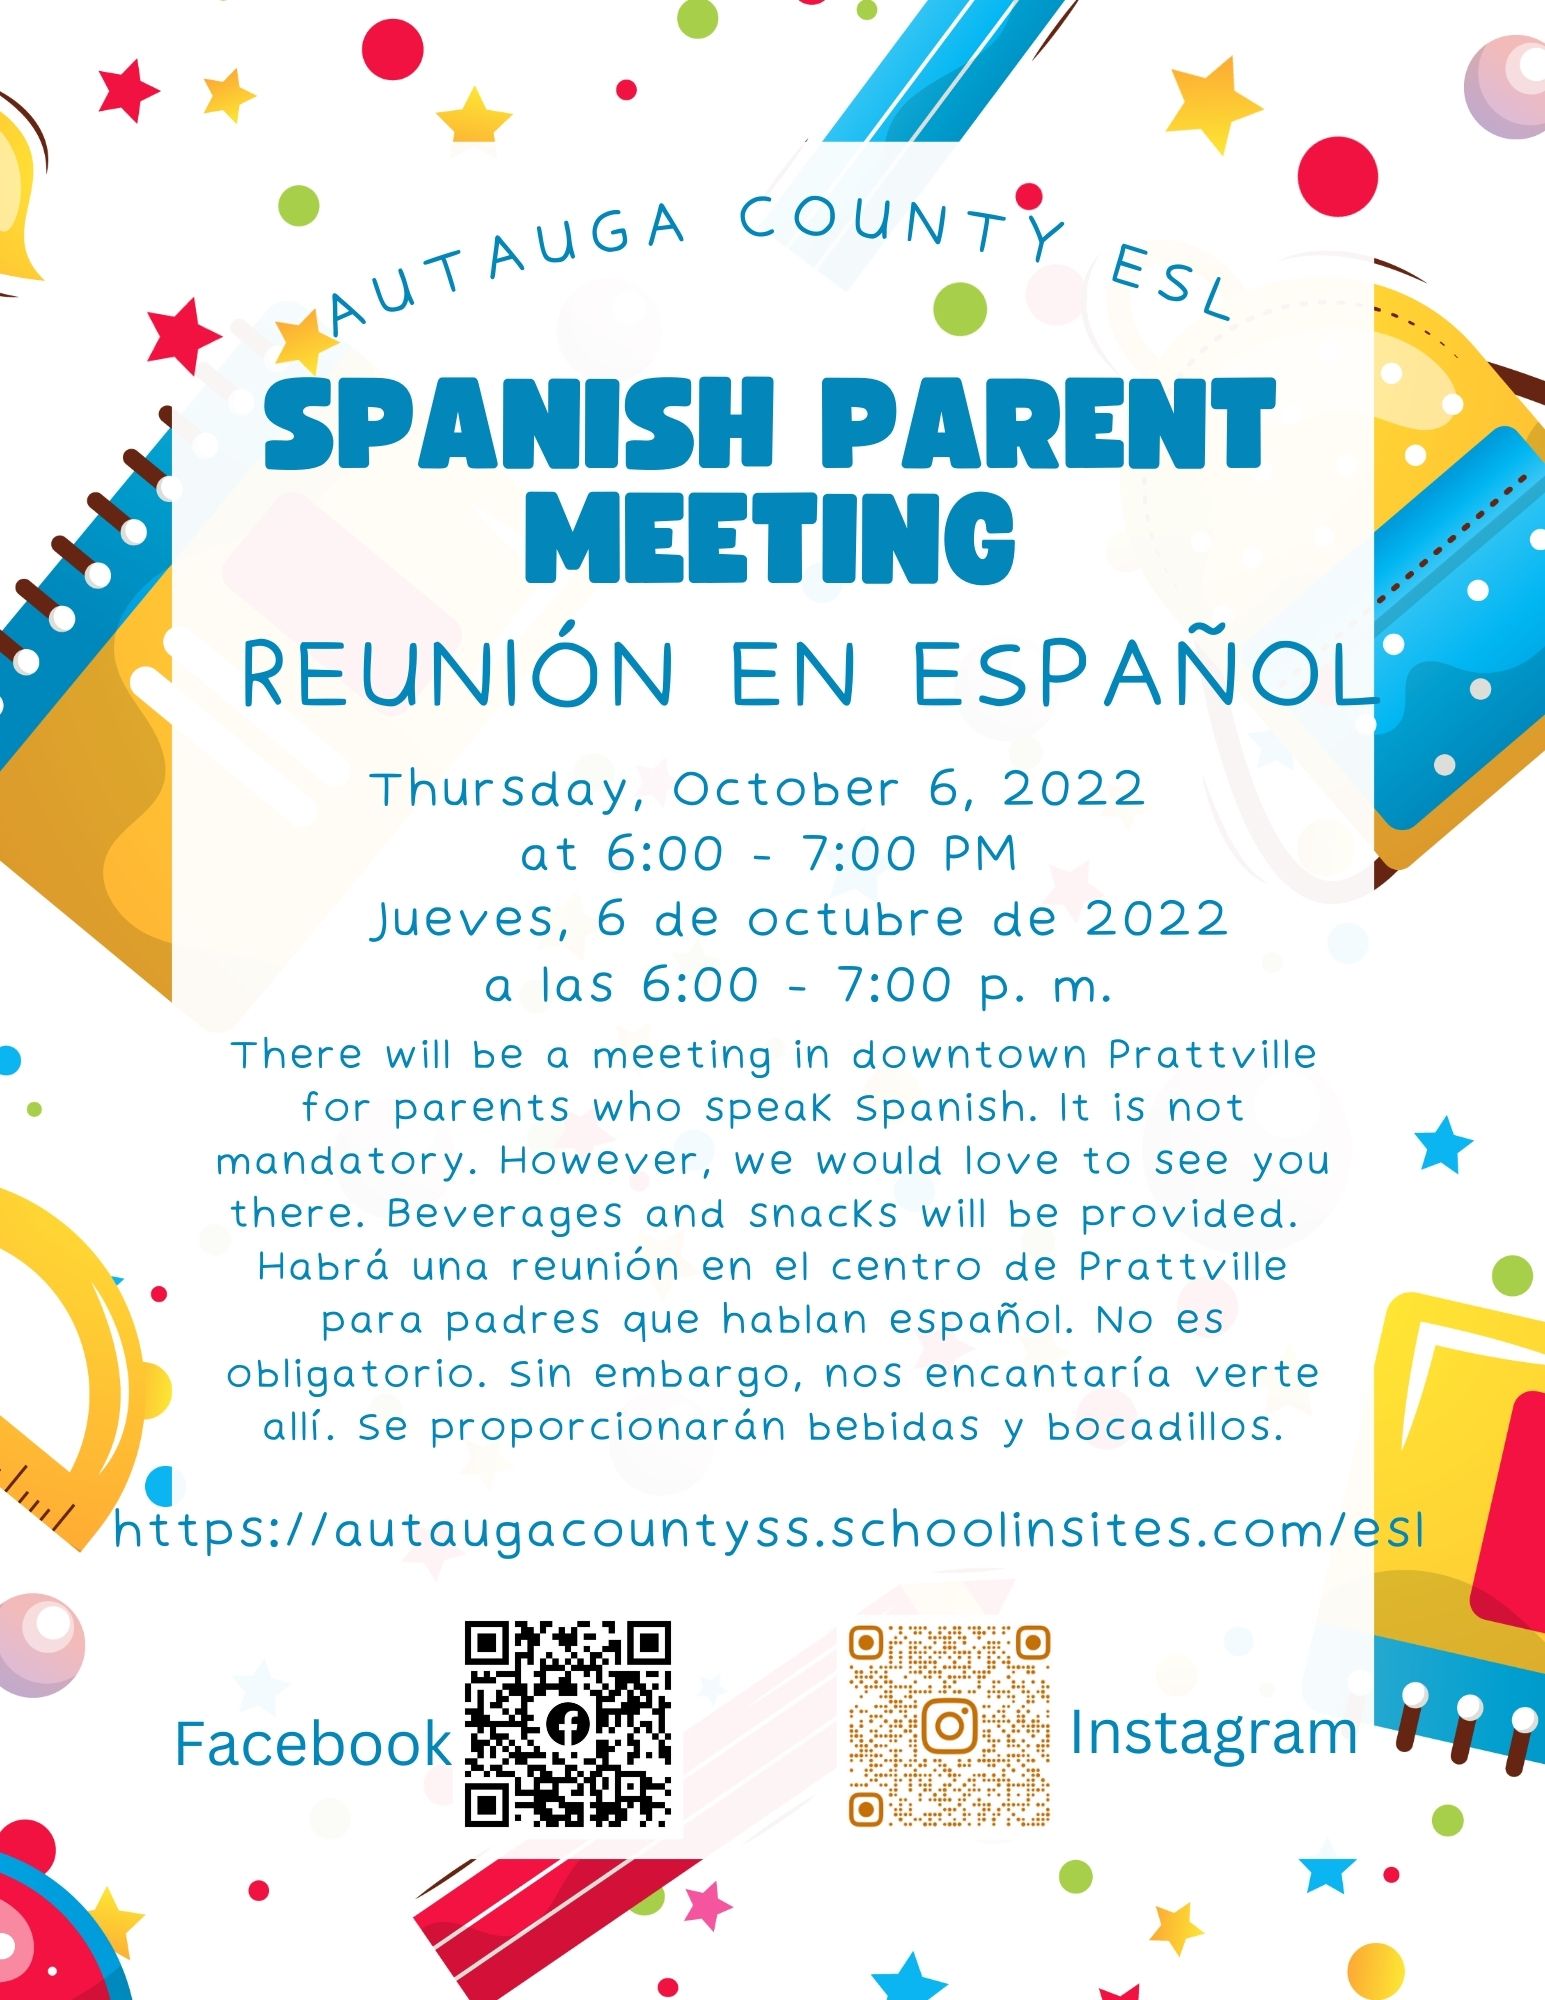 Spanish Parent Meeting, October 6, 6:00 pm, in downtown Prattville, for parents who speak spanish, meeting is not mandatory